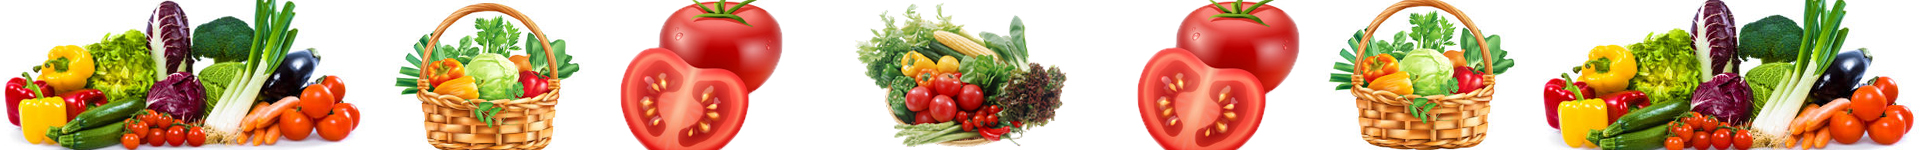 Vegetable and Fruits image